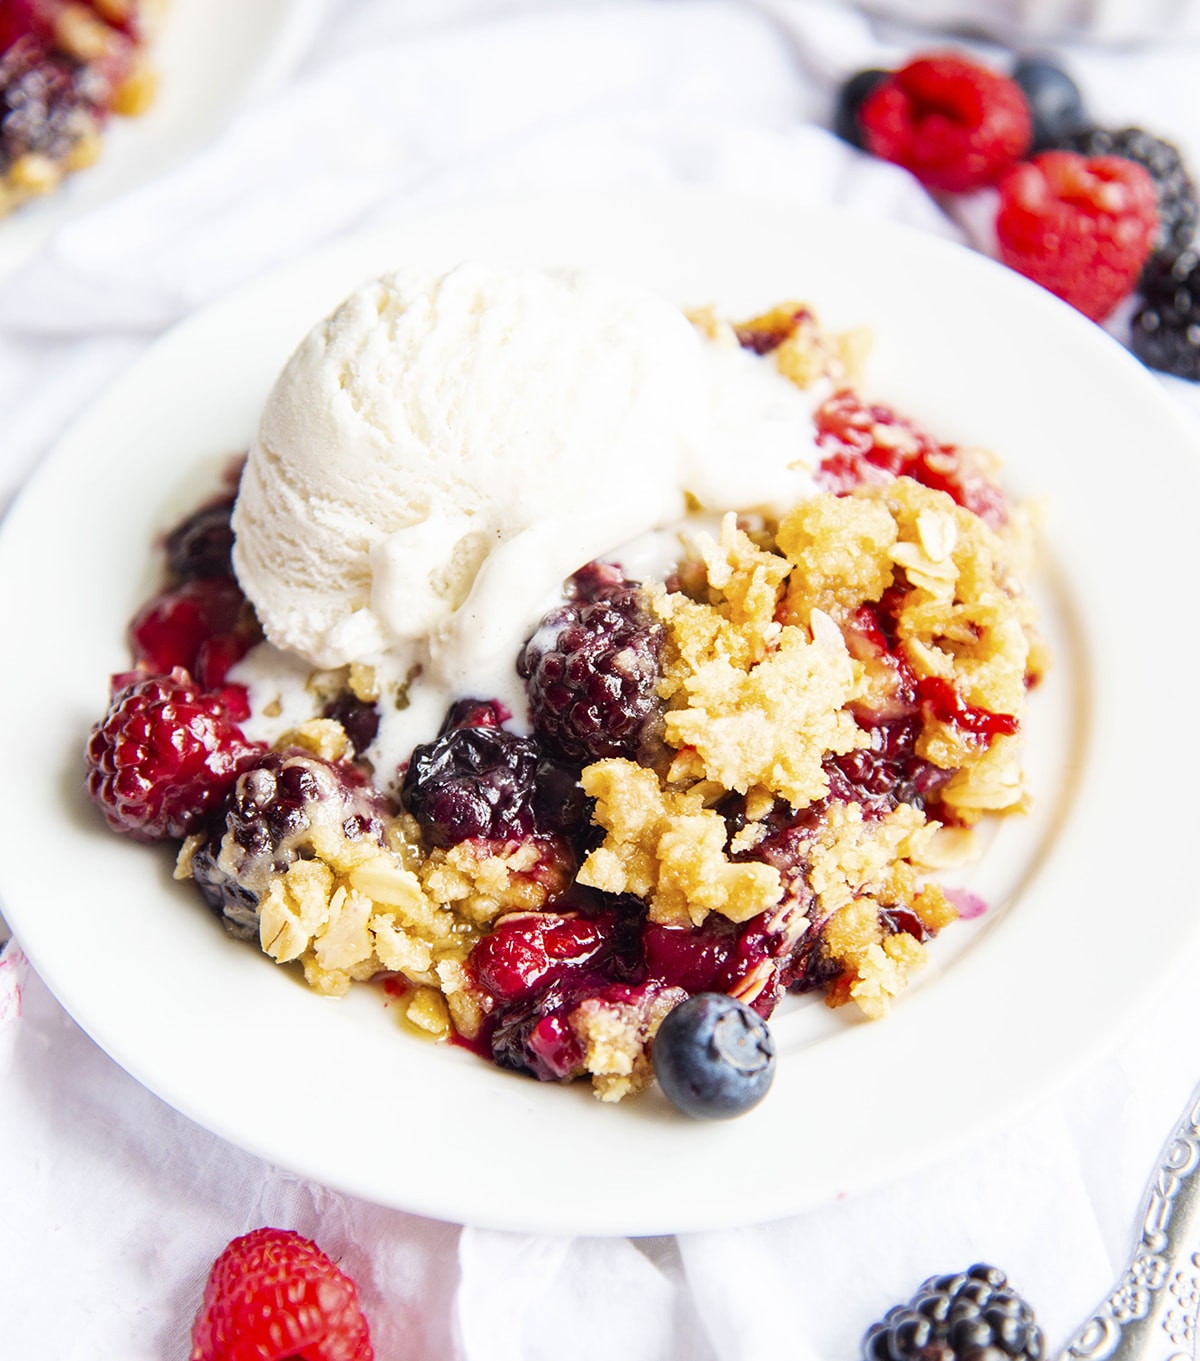 A plate of berry crisp with ice cream.